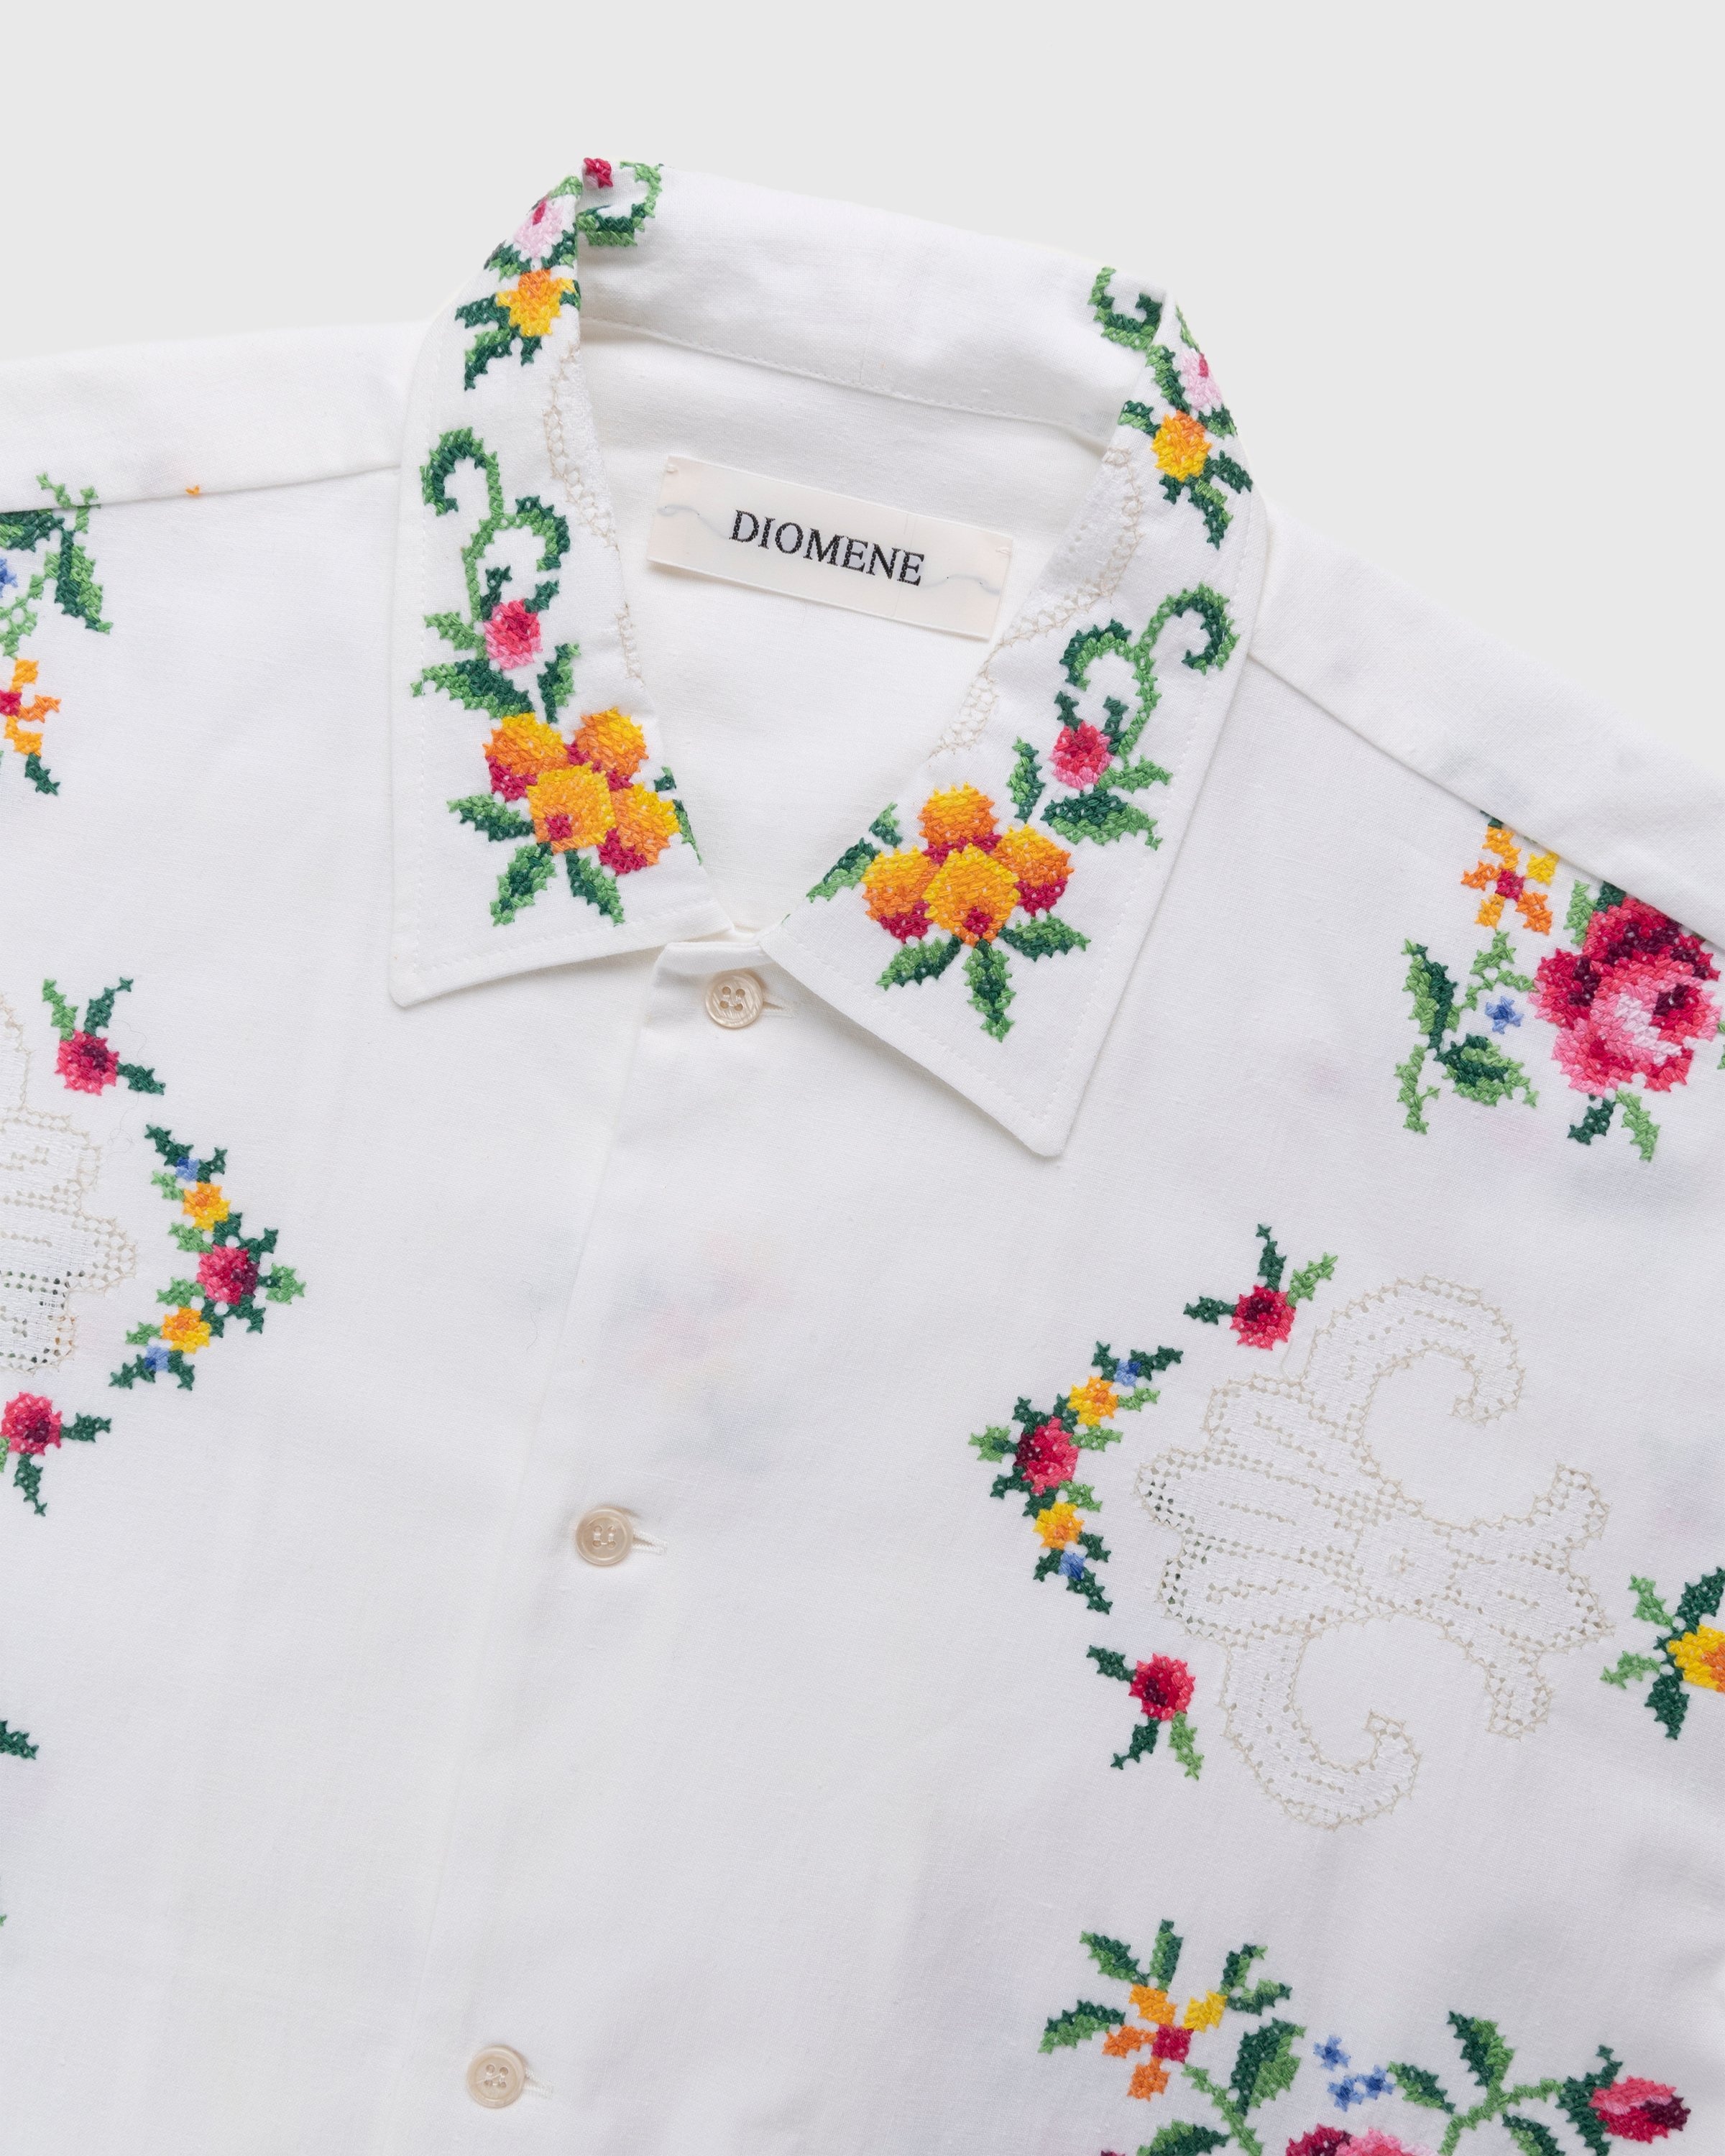 Diomene by Damir Doma – Embroidered Vacation Shirt White/Green - Shortsleeve Shirts - White - Image 6